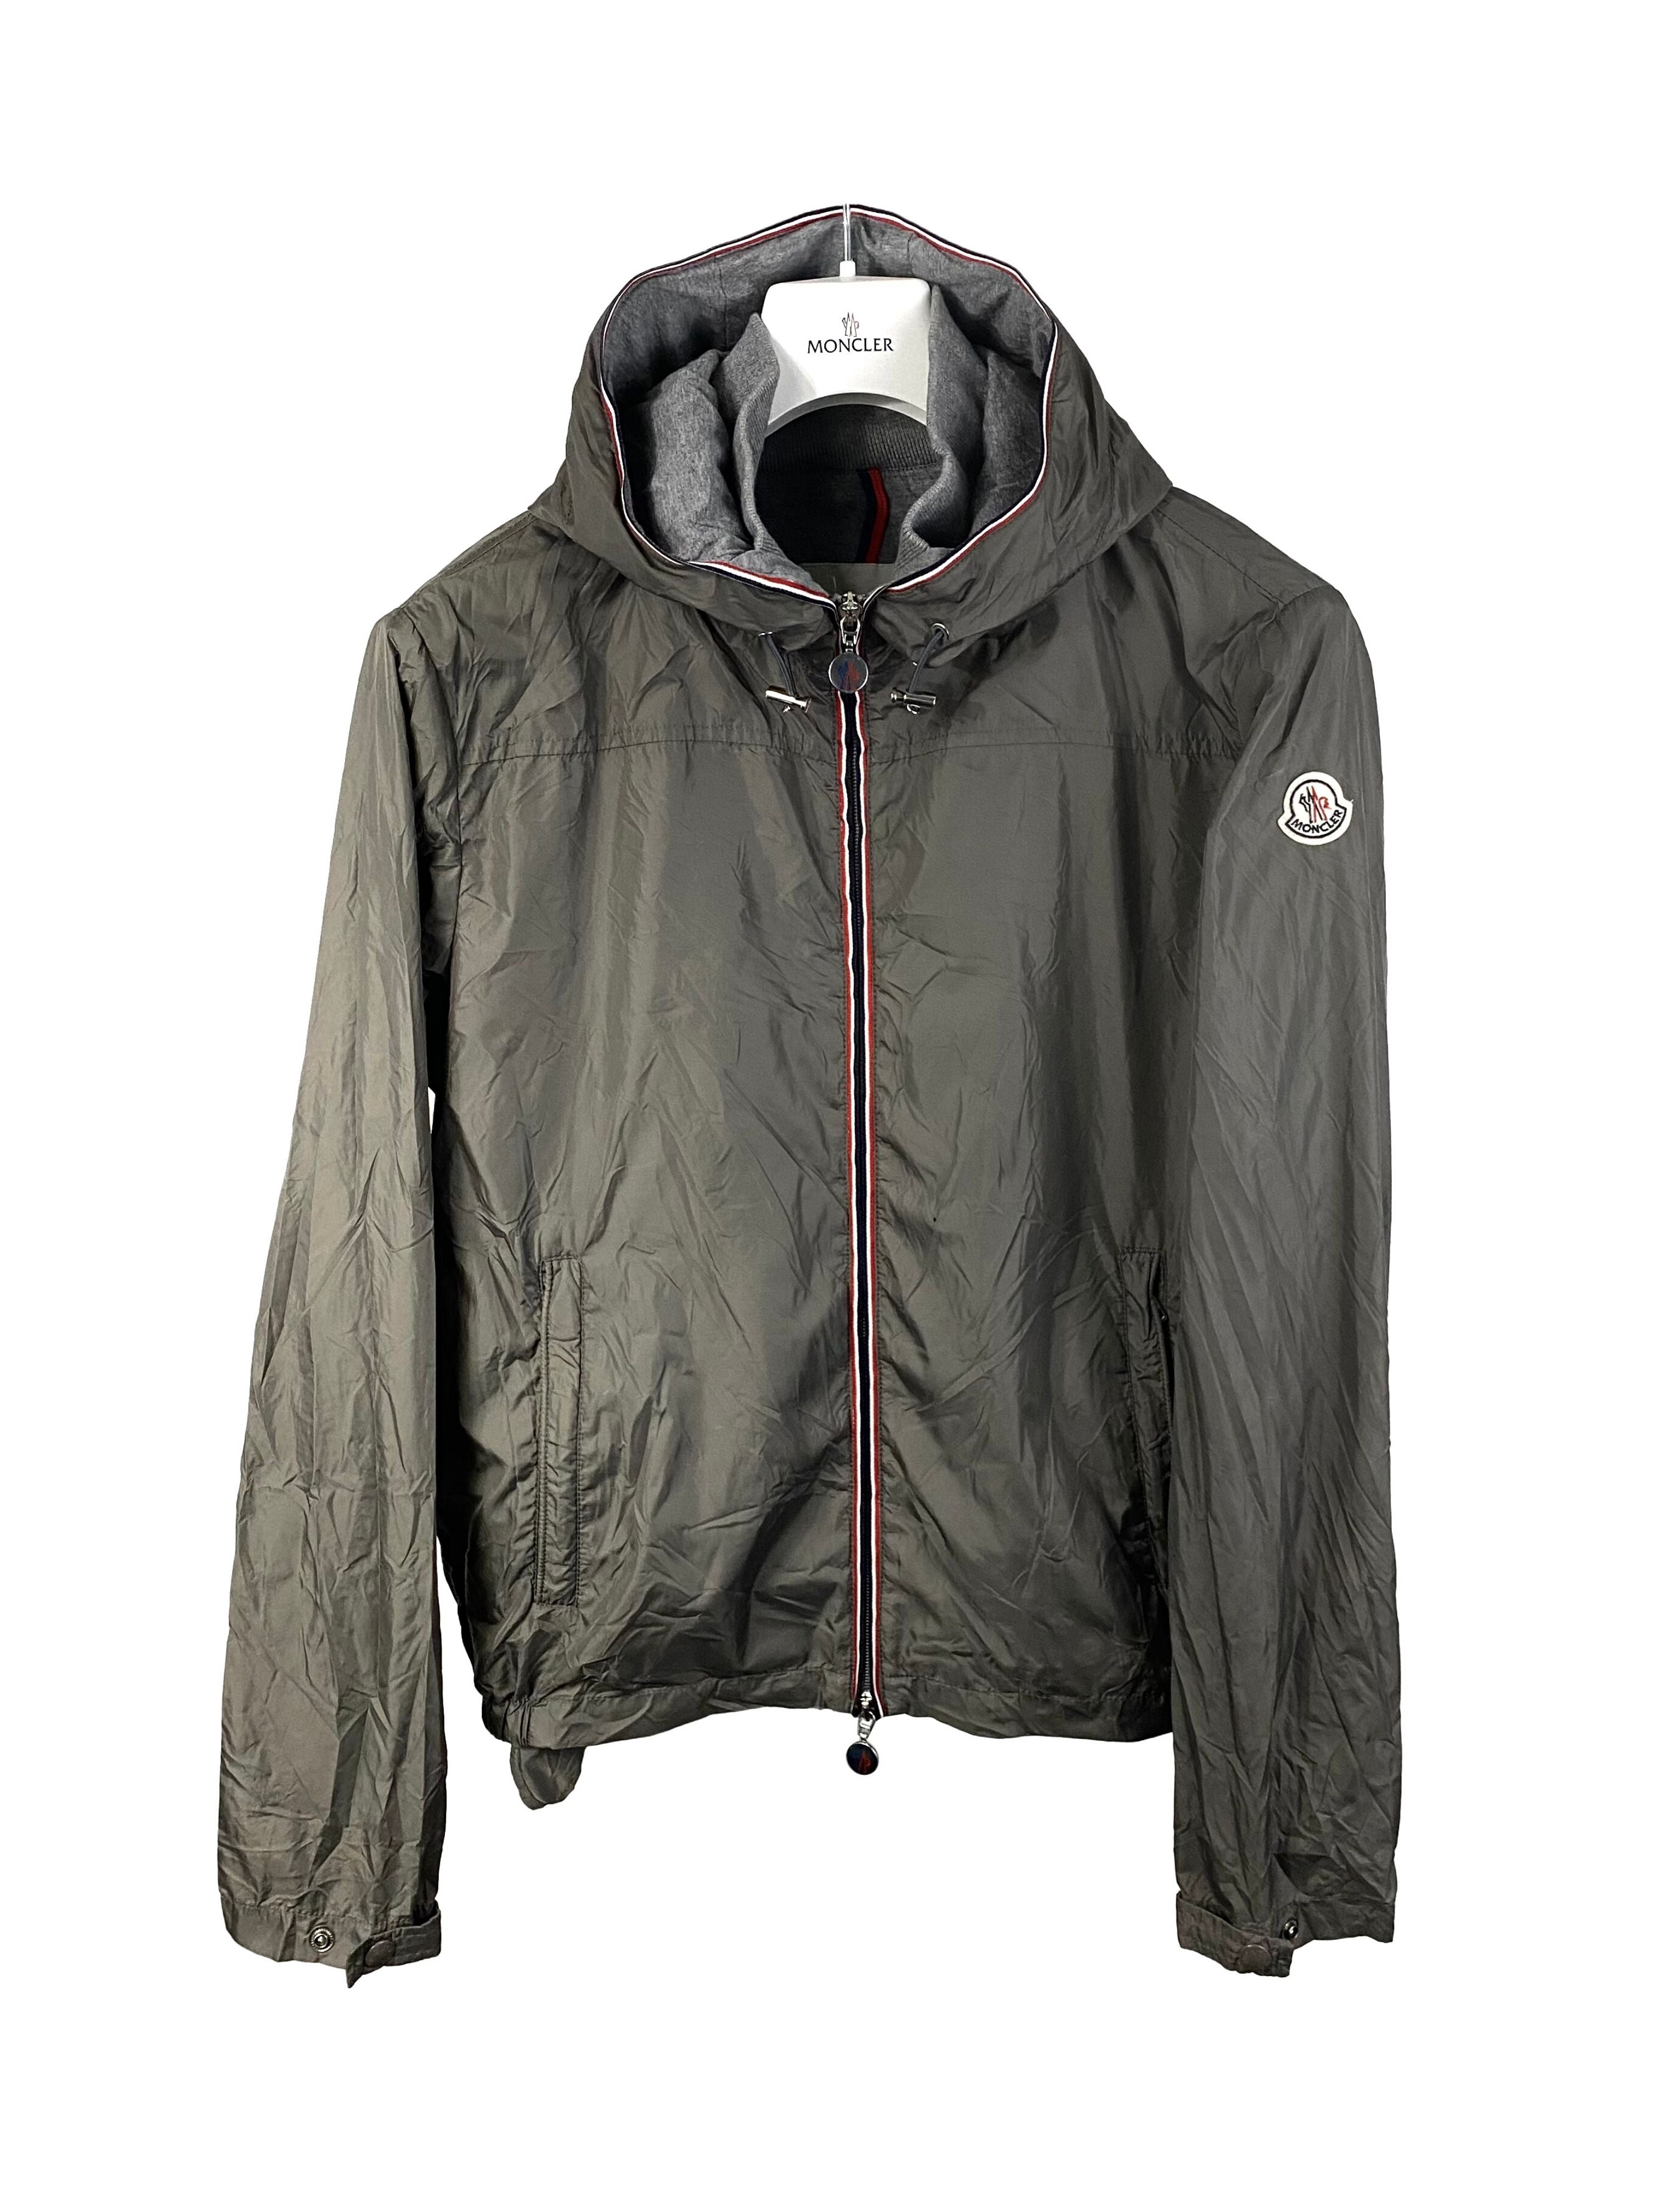 Moncler Urville - Size 2 - HB Authenticated Luxury Wear